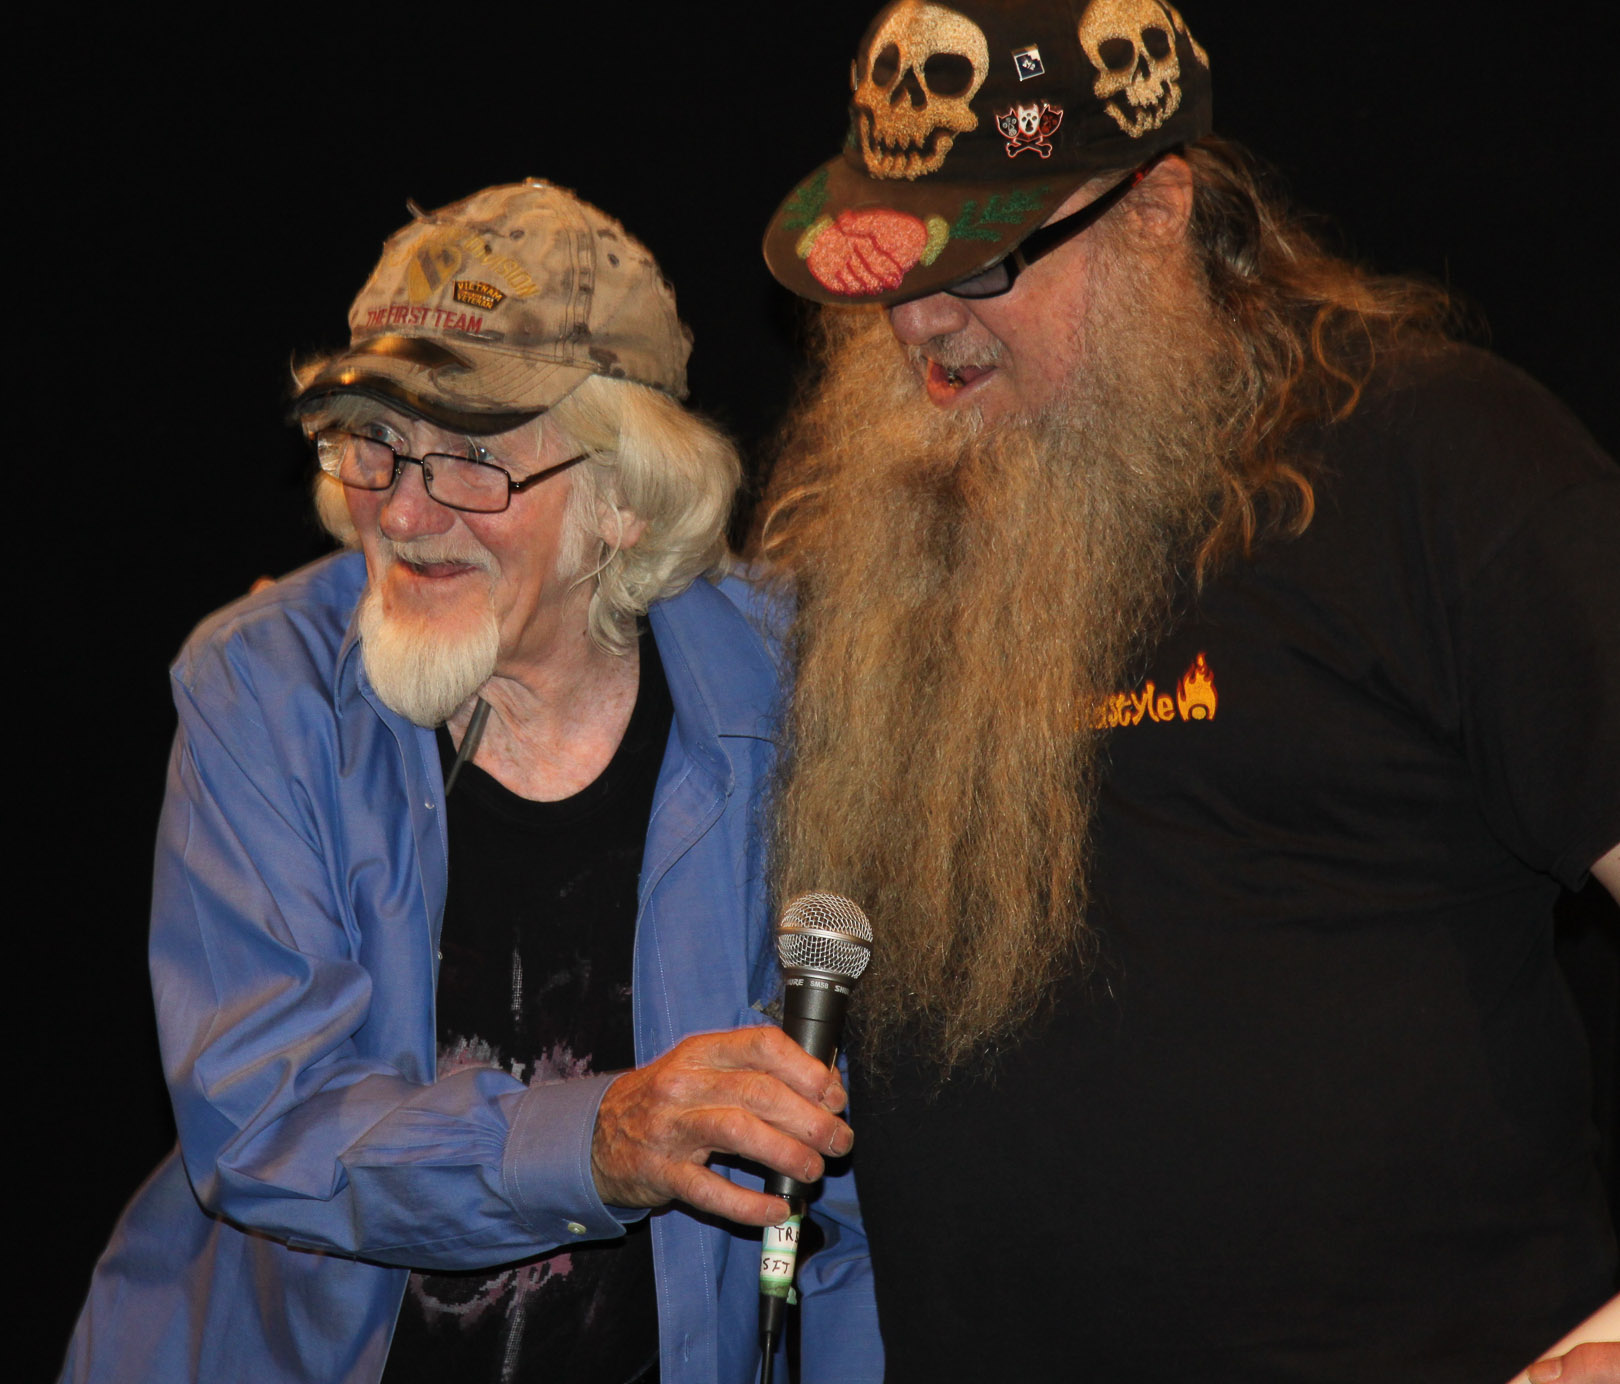 Jim Power, the Mosaic Man, left, was honored by Clayton Patterson at last year’s Acker Awards for defiant avant-garde artists, held at Theatre 80 on St. Mark’s Place.    Photo by Tequila Minsky